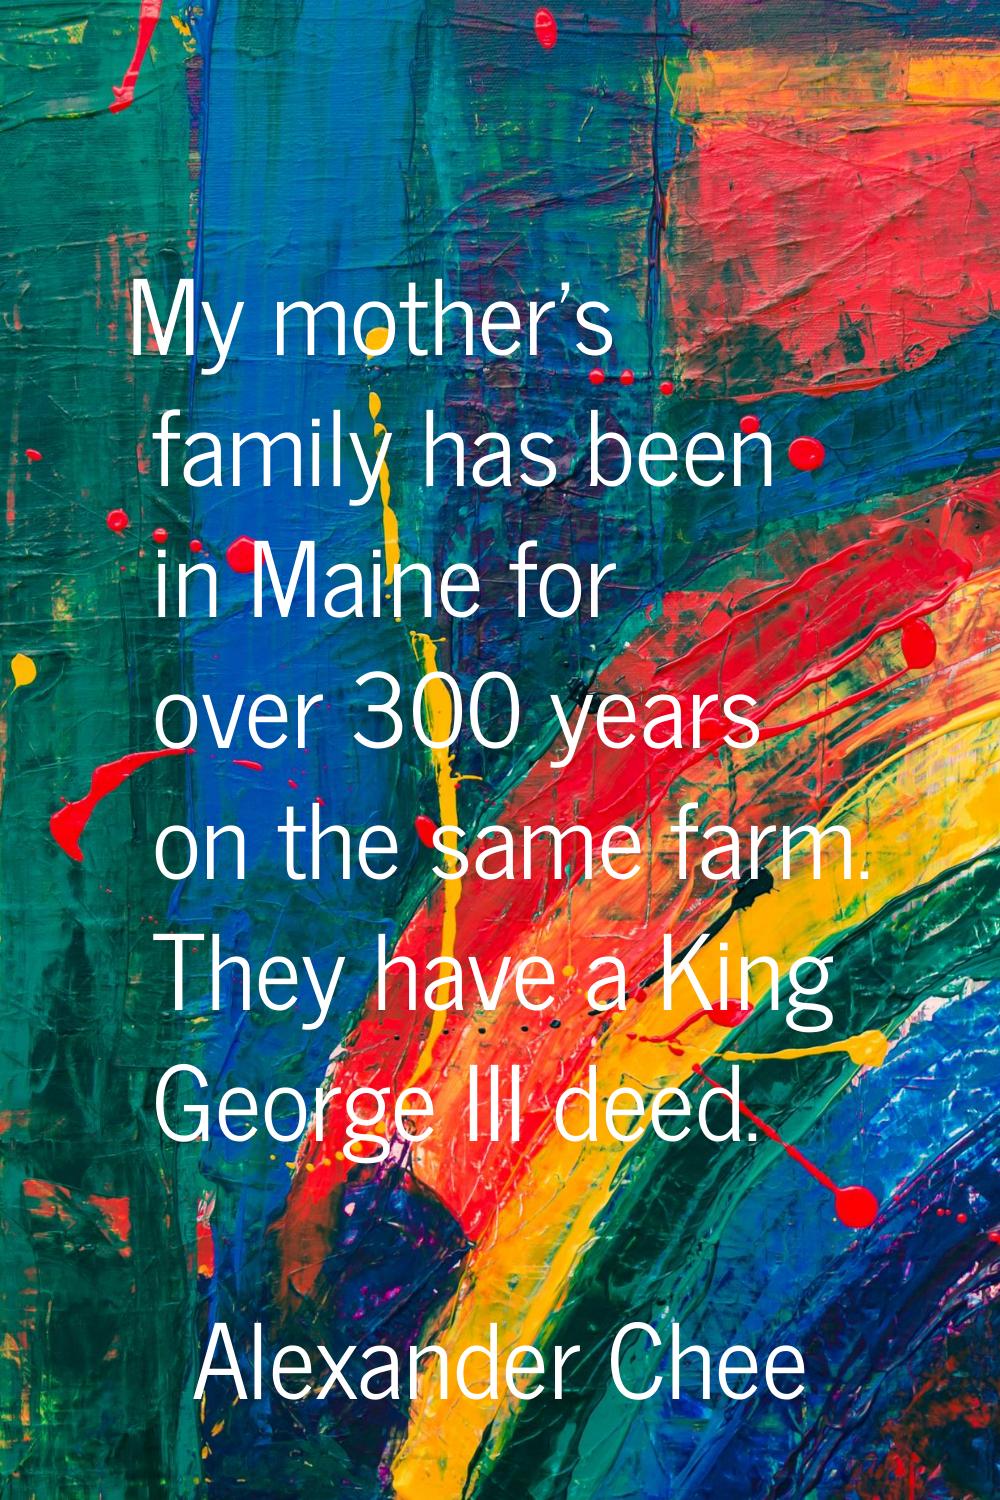 My mother's family has been in Maine for over 300 years on the same farm. They have a King George I